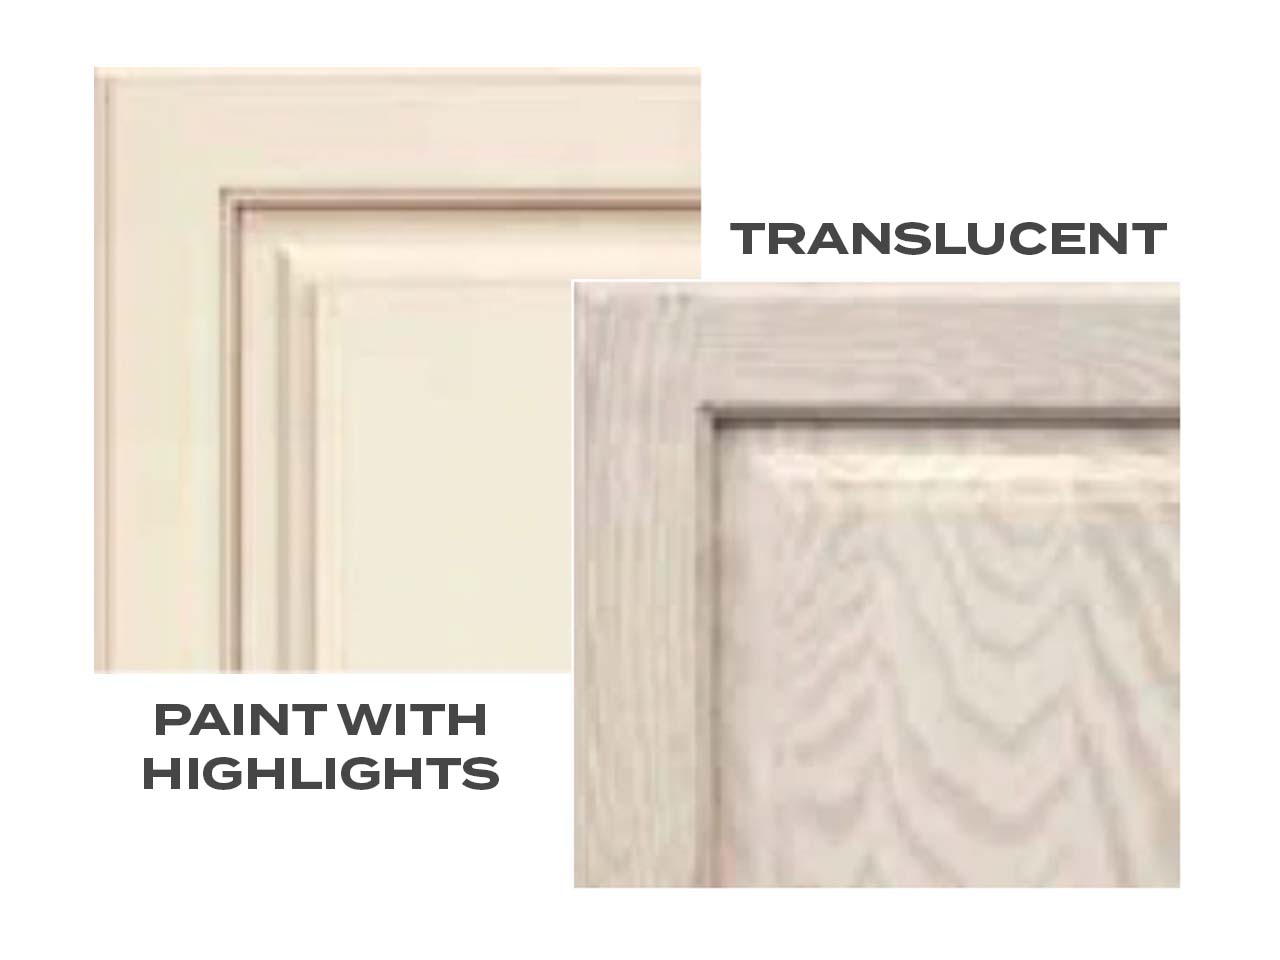 KraftMaid cabinet paint with highlights or translucent paint